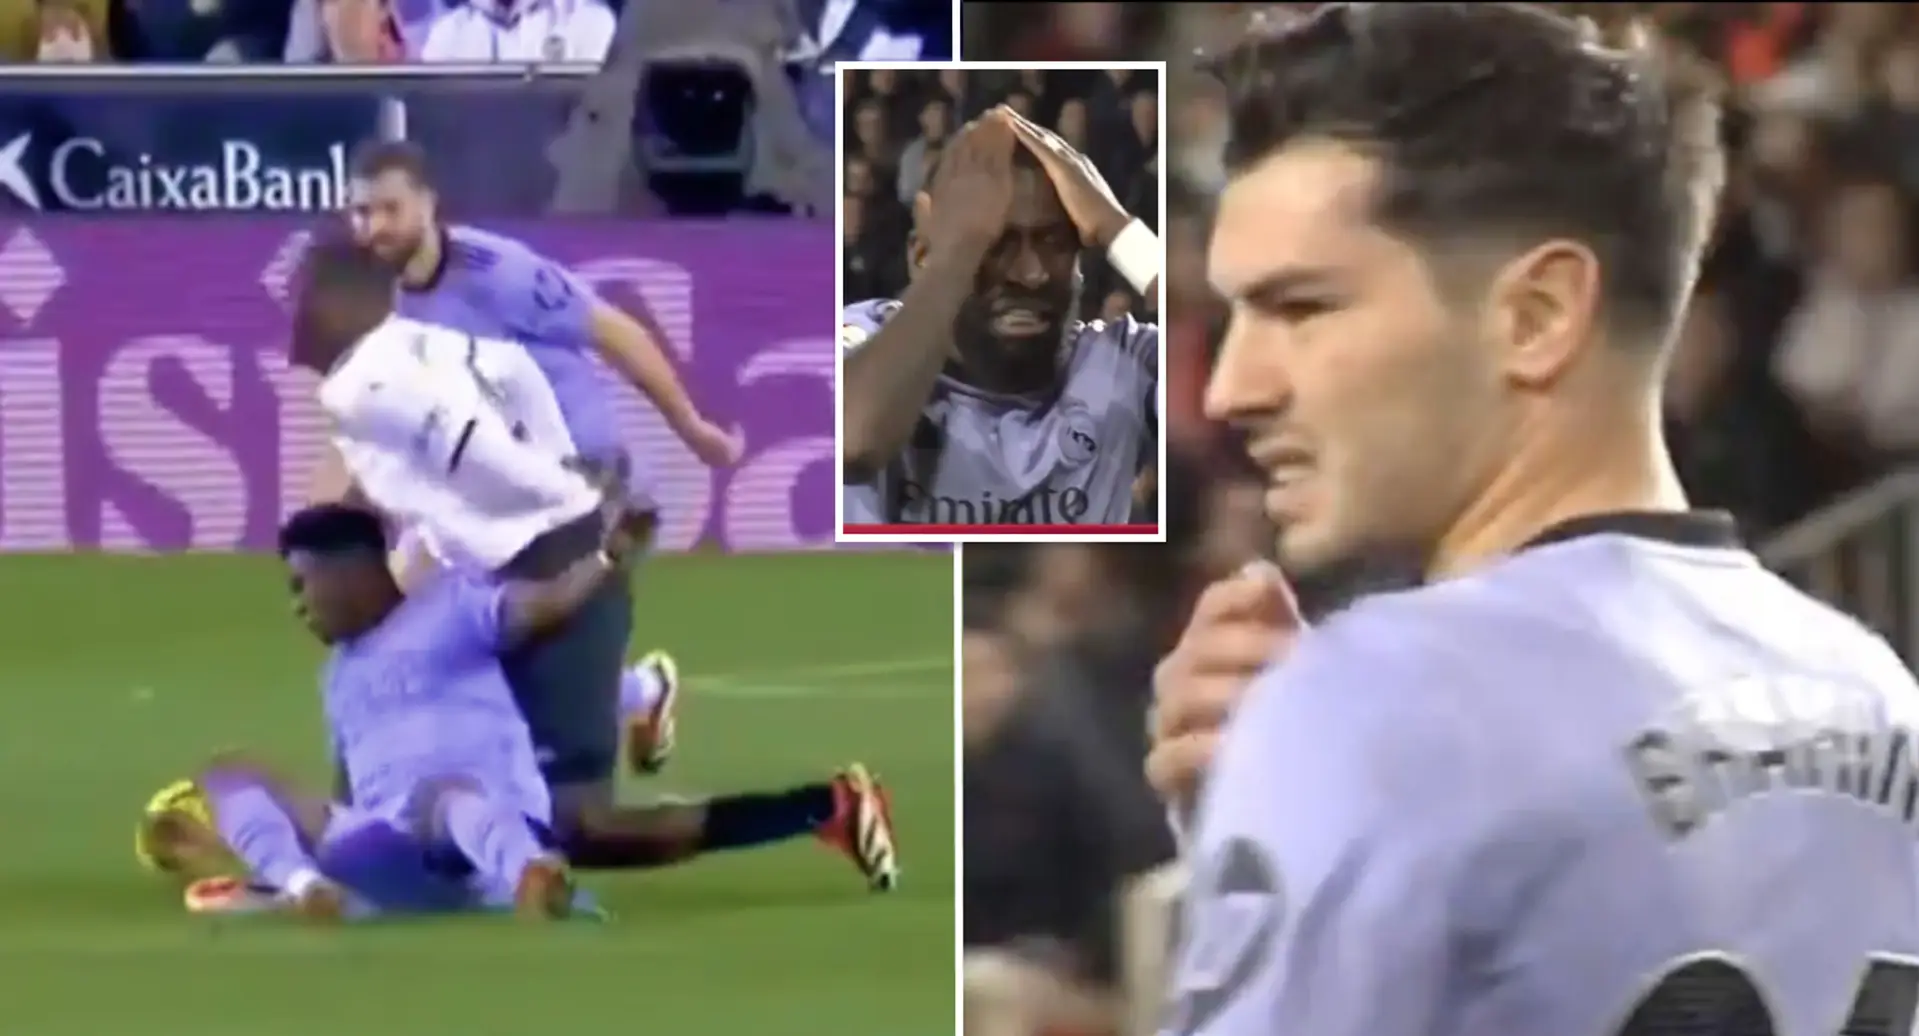 Valencia player suffers horrific leg break after collision with Tchouameni – players' reaction says it all